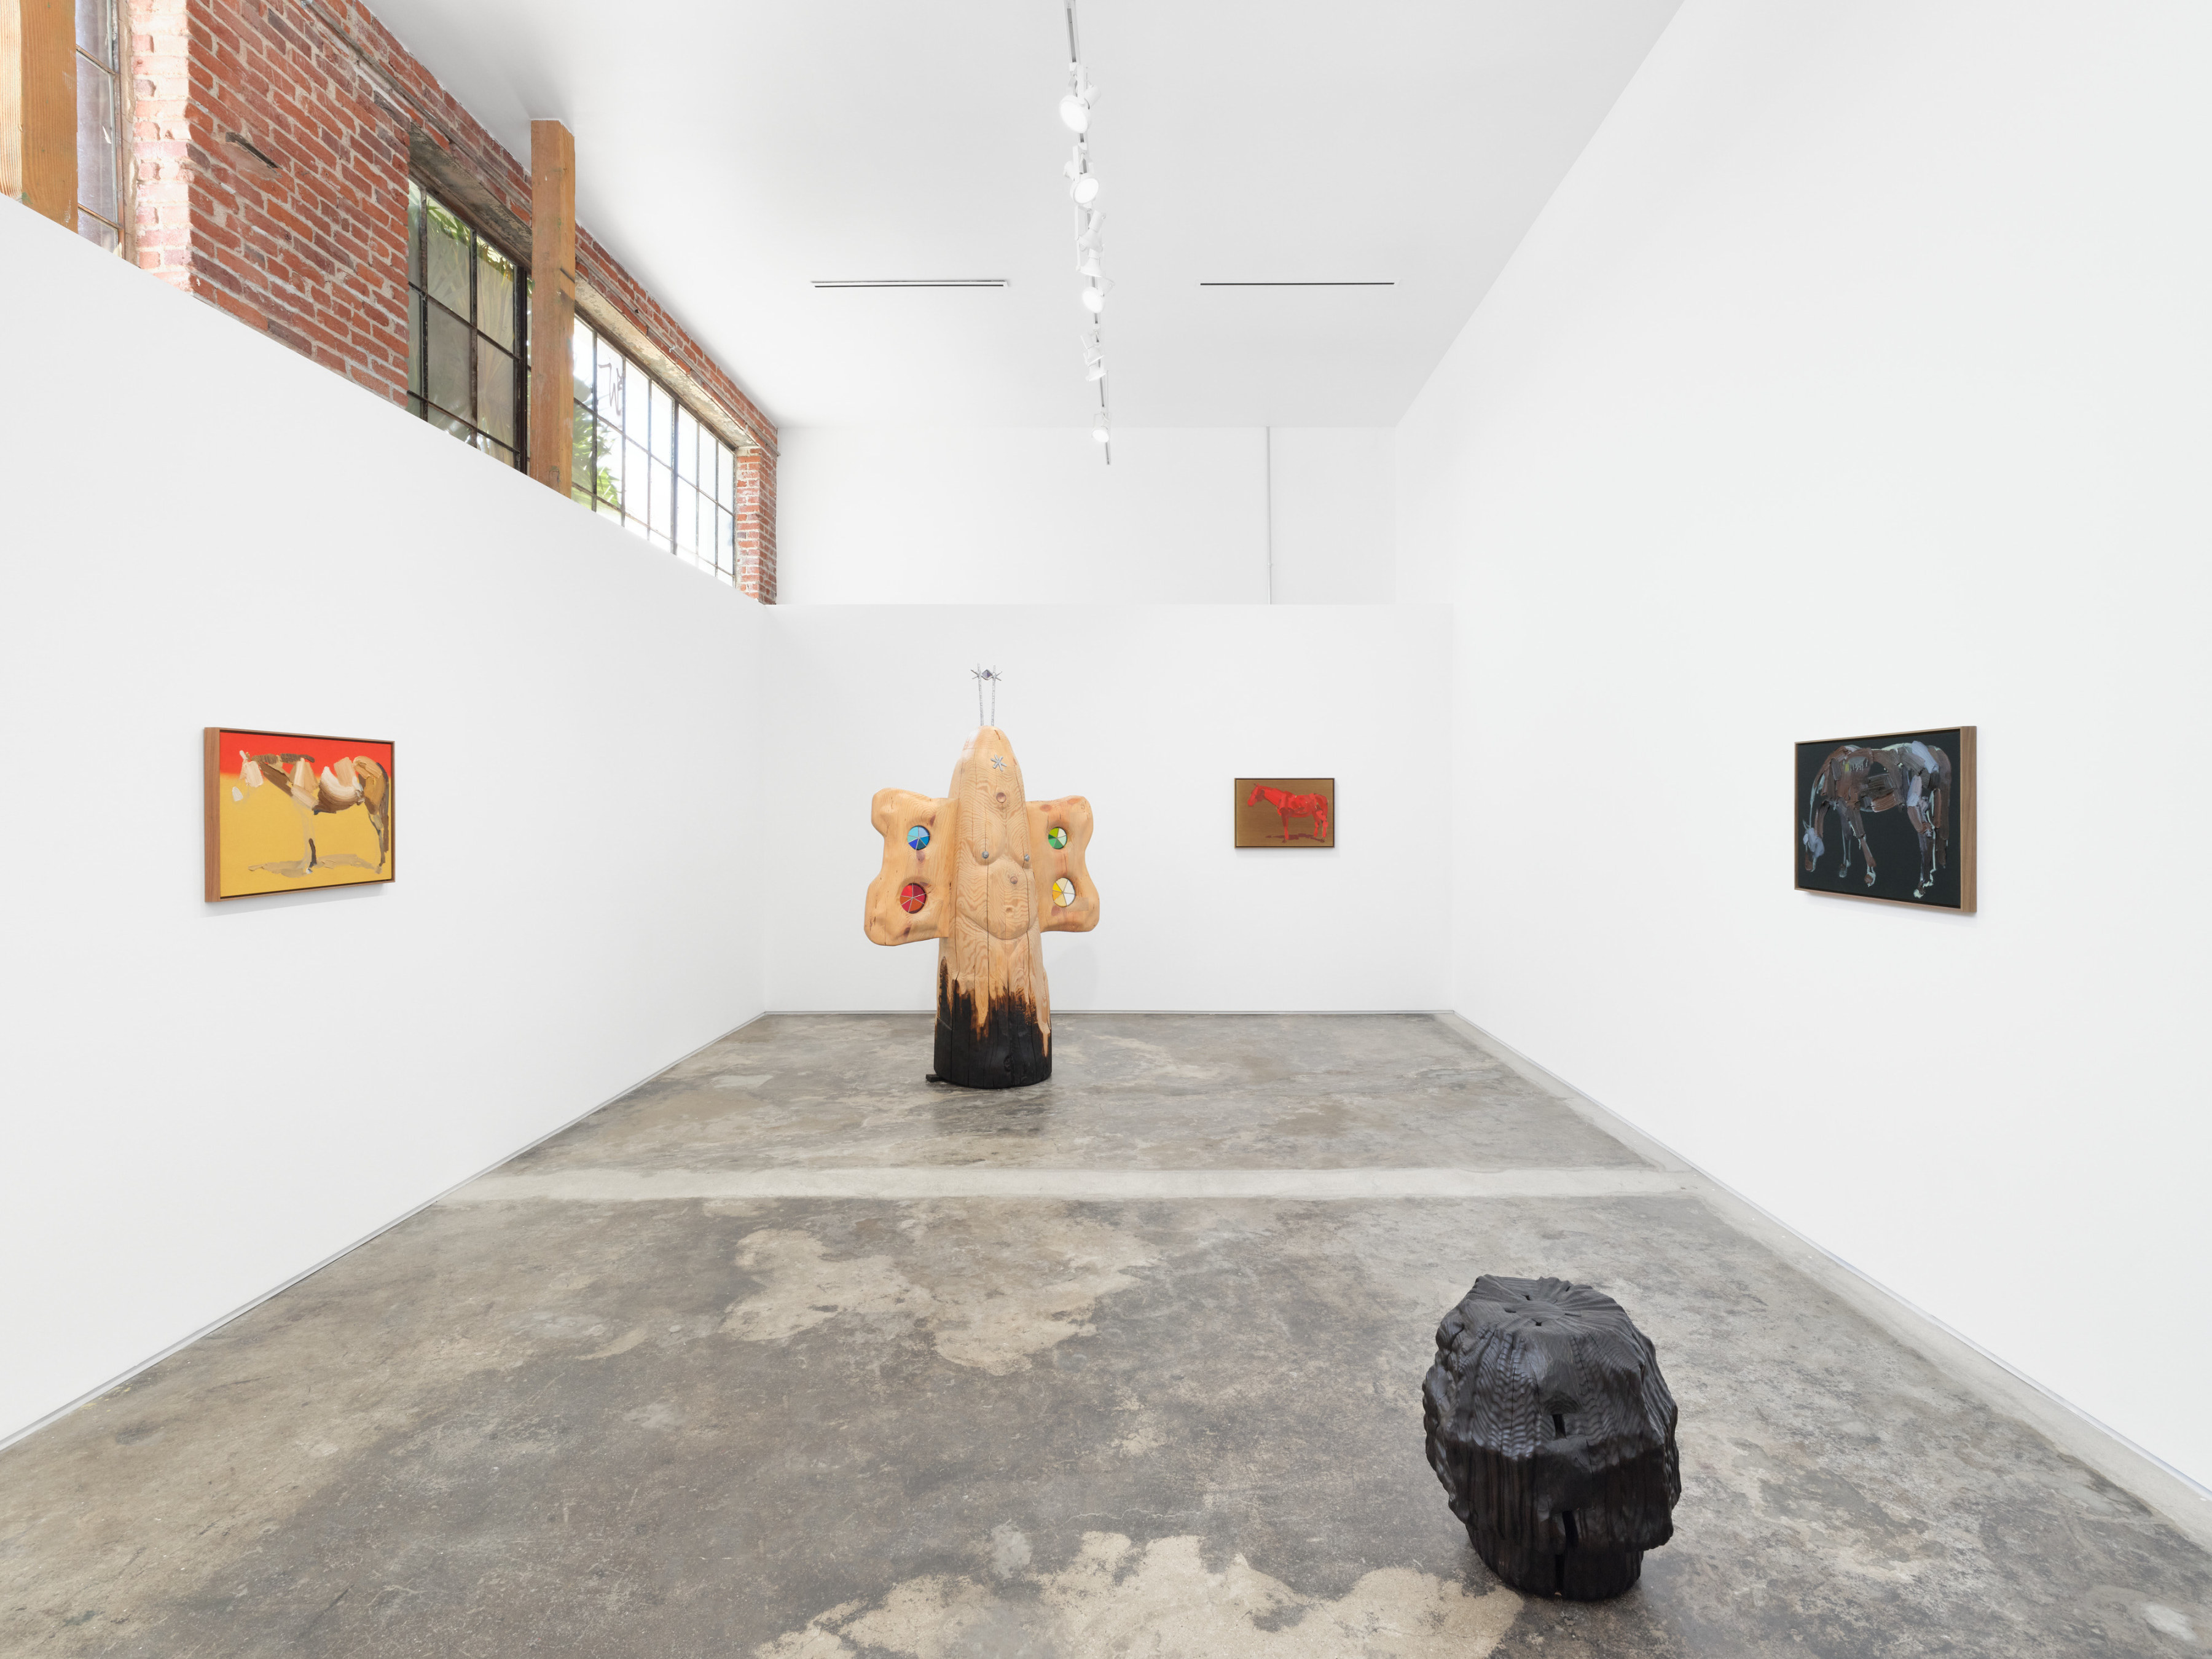 Installation view of "Dan John Anderson and Andy Woll"